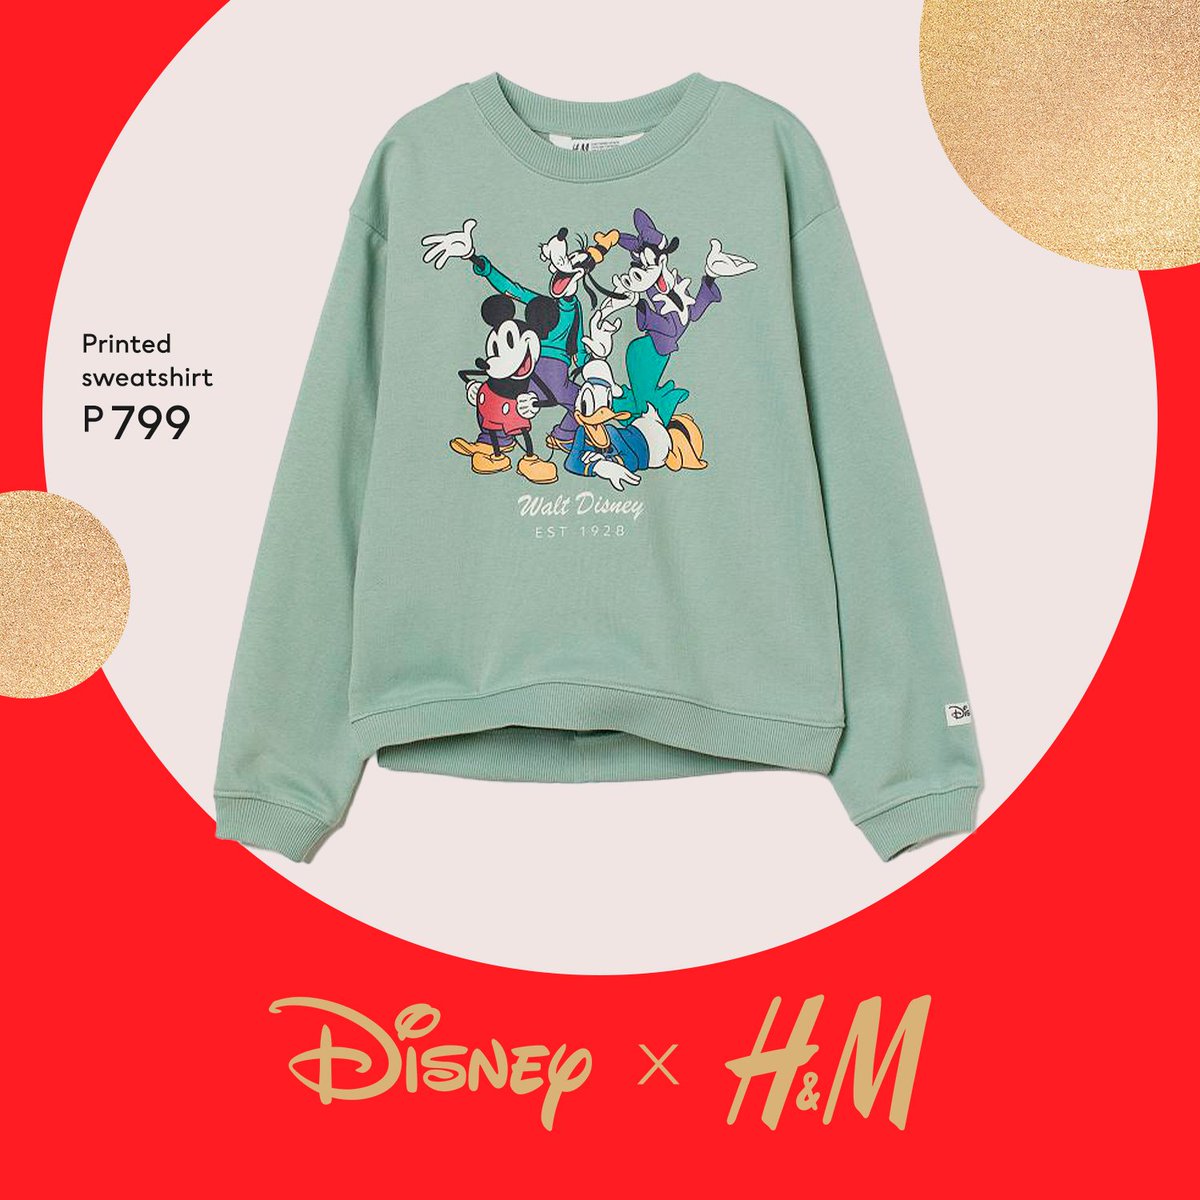 The #DisneyxHM collection features classic Holiday hues to put your little one in the mood. #HMKids

 Get this sweatshirt at P799 in stores and online: hm.com/kids/shop-by-f…